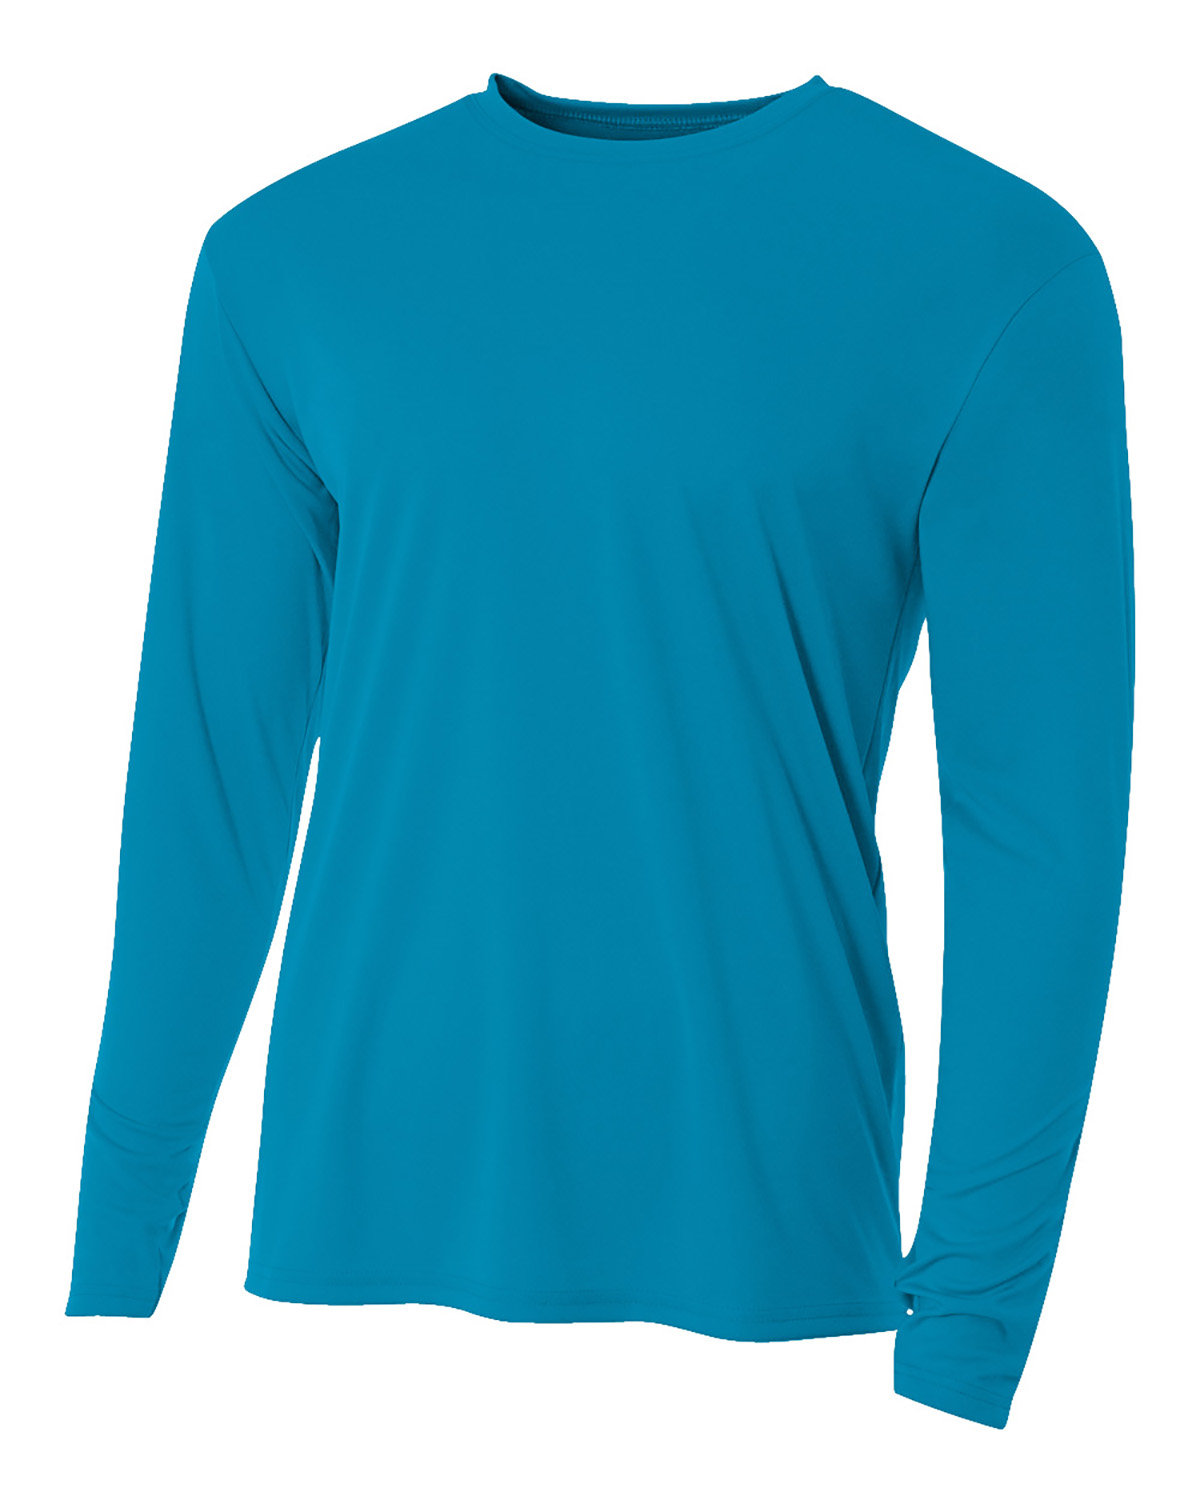 A4 Men's Cooling Performance Long Sleeve T-Shirt electric blue 